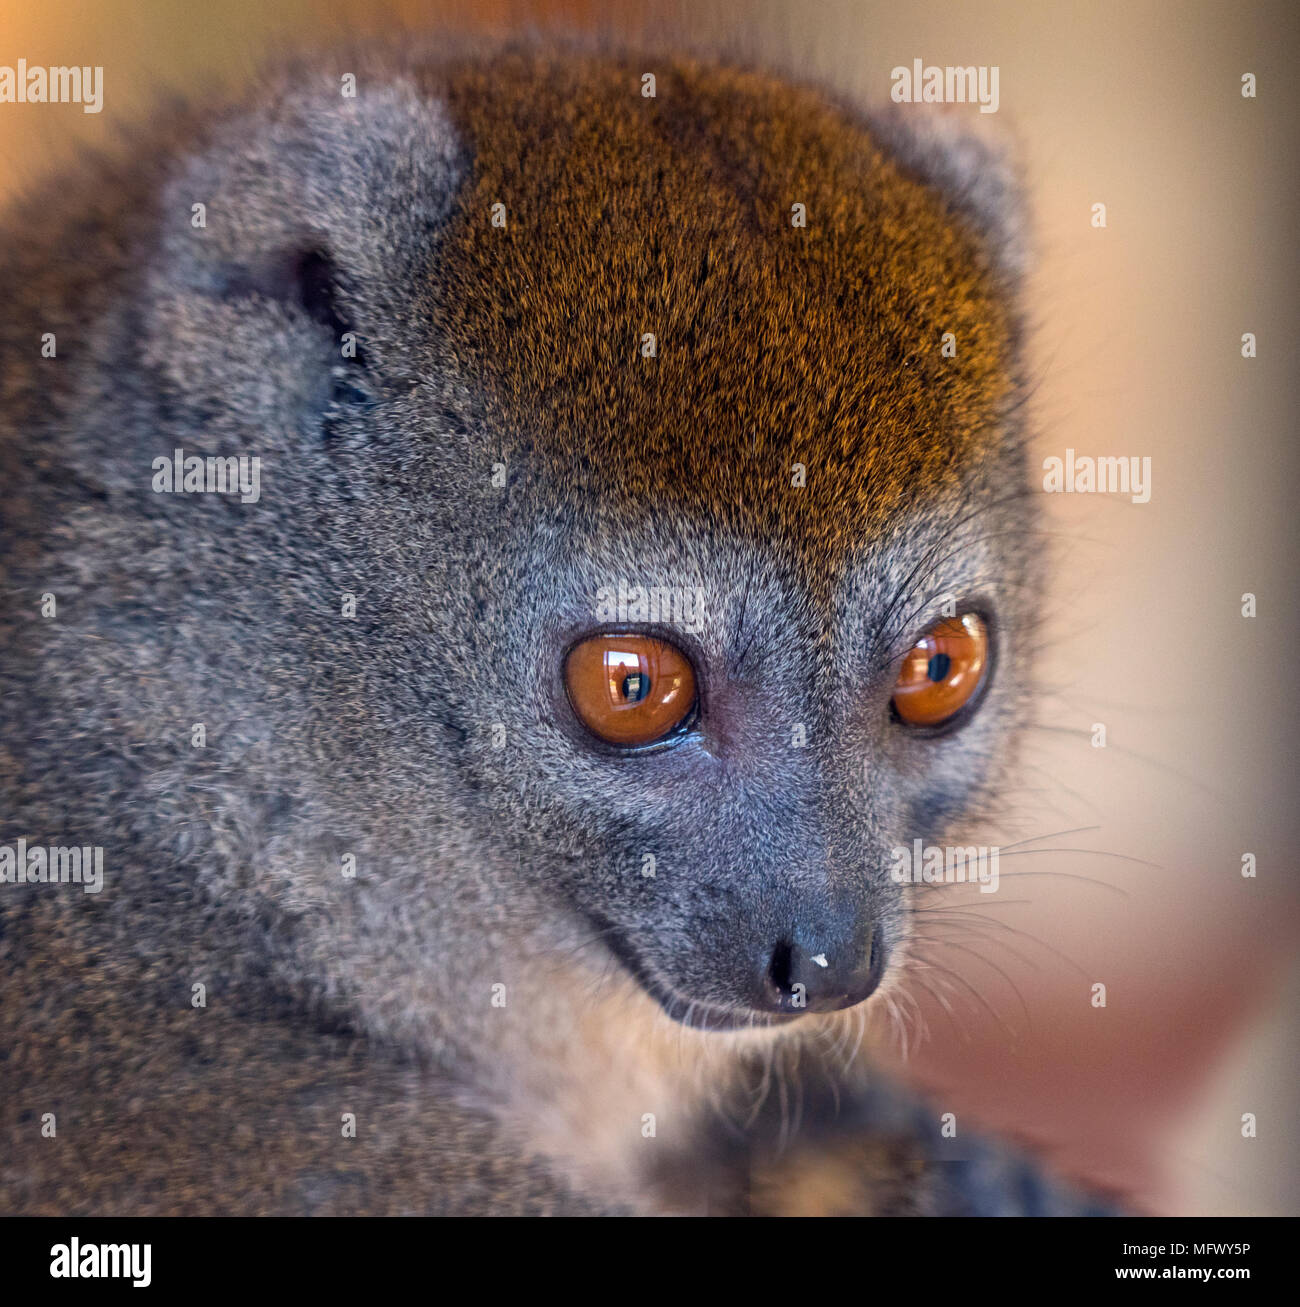 Western lesser bamboo lemur Hapalemur occidentalis also known as the northern bamboo lemur ,western gentle lemur,Sambirano lesser bamboo lemur Stock Photo